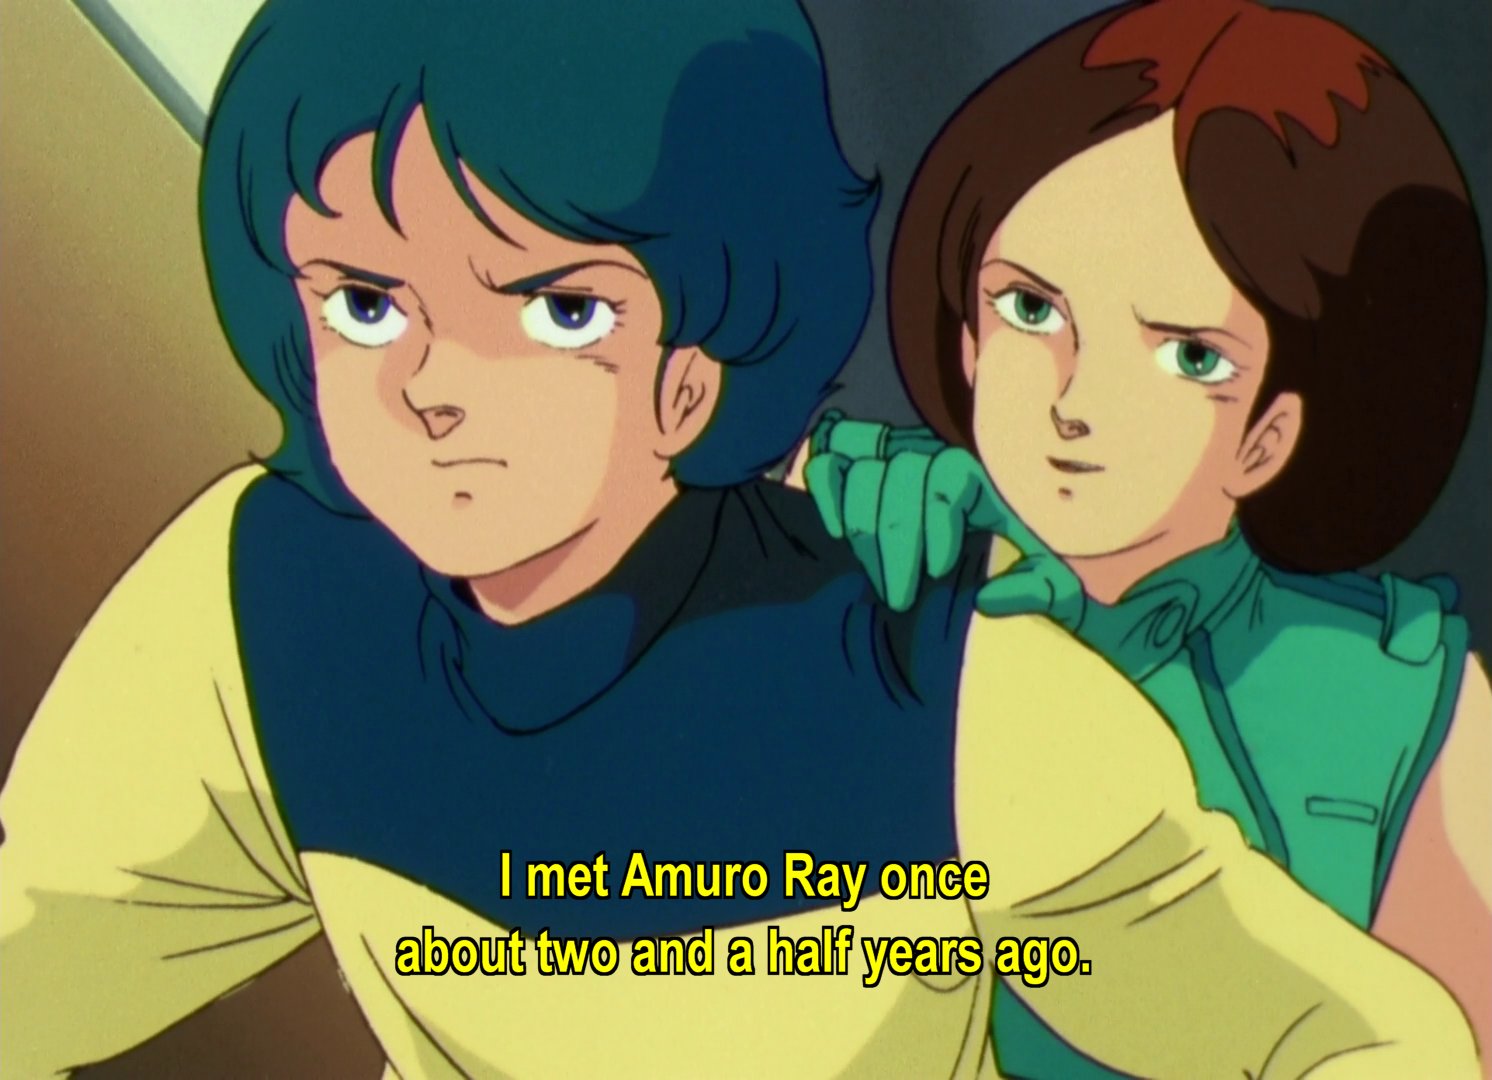 Kamille angry and walking away but Emma holding his shoulder.  Emma: I met Amuro Ray once about two and a half years ago.